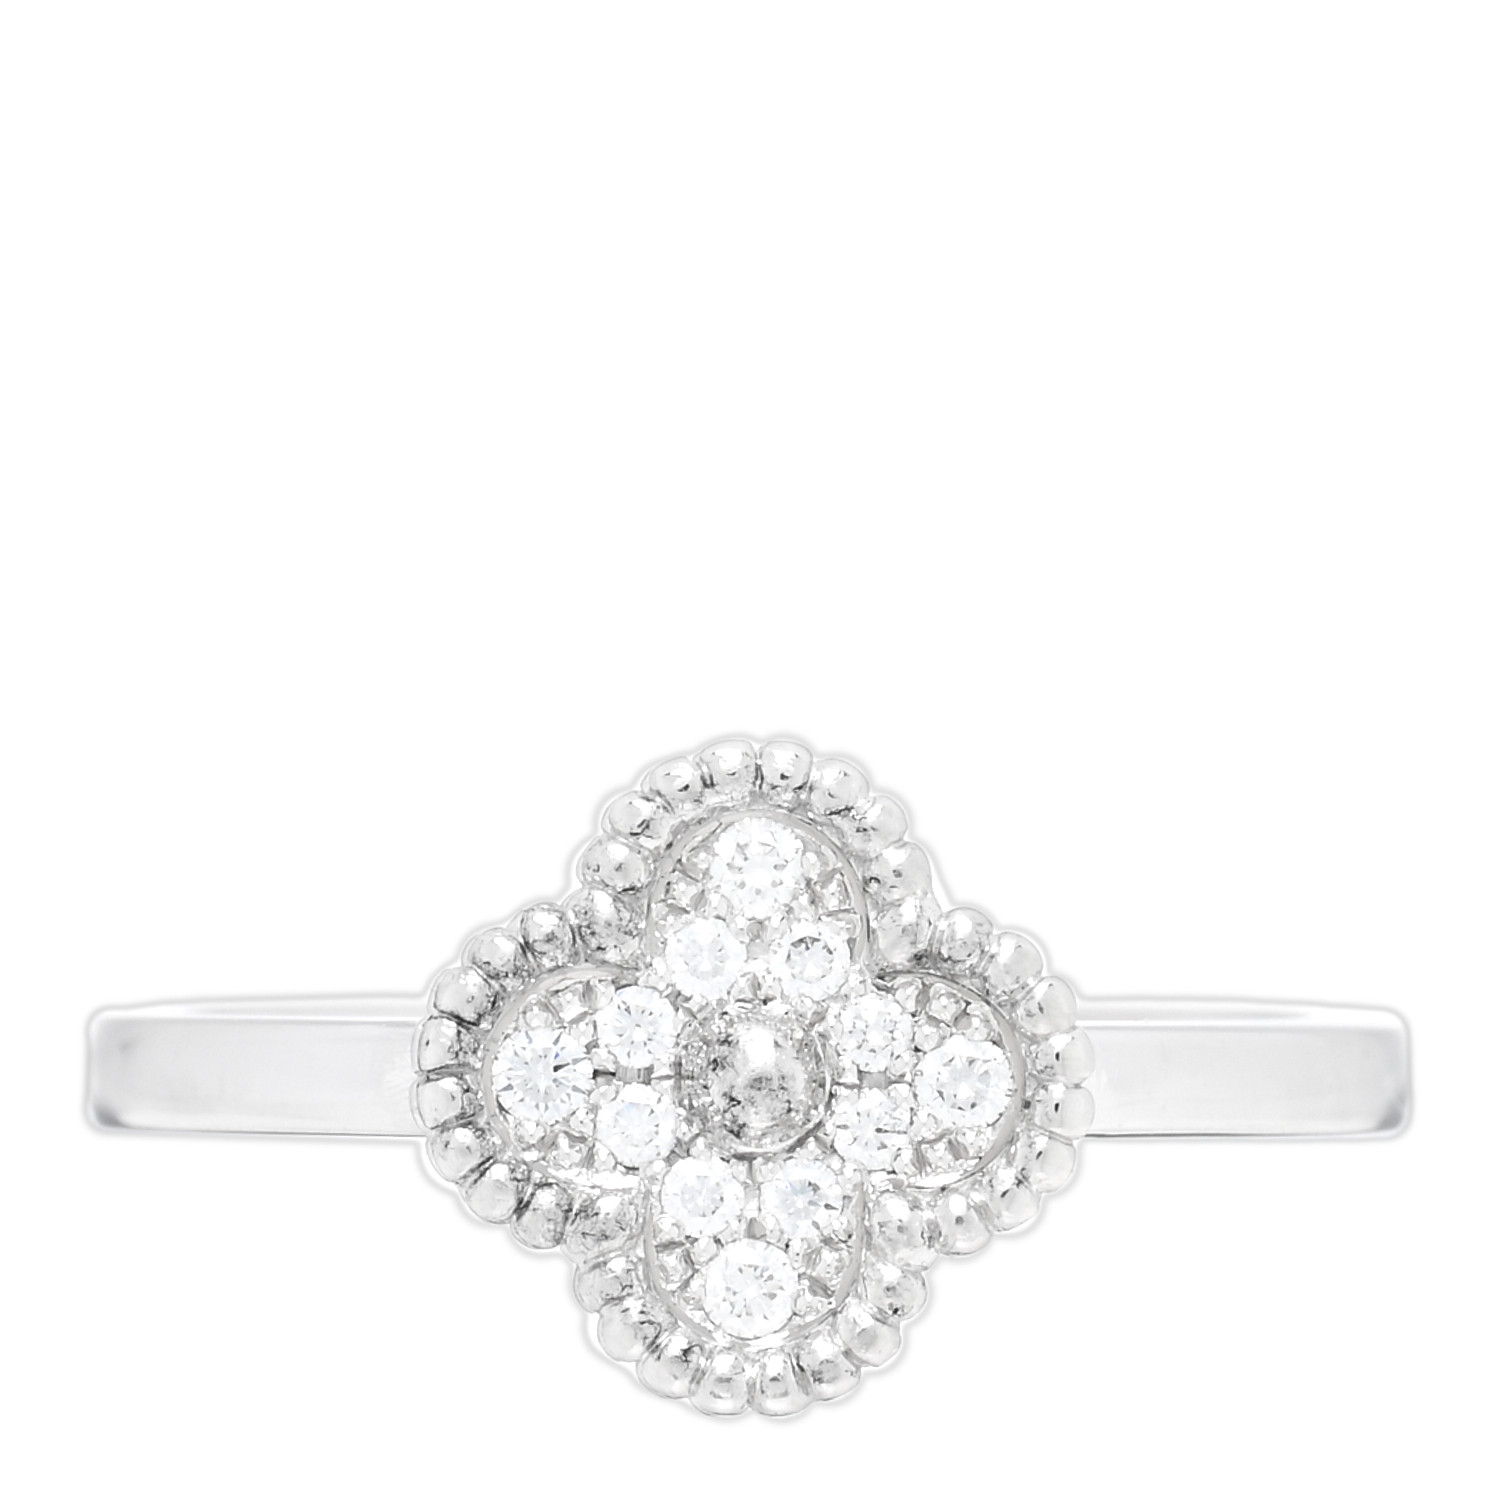 VAN CLEEF & ARPELS 18K White Gold Diamond Sweet Alhambra Ring by FASHIONPHILE